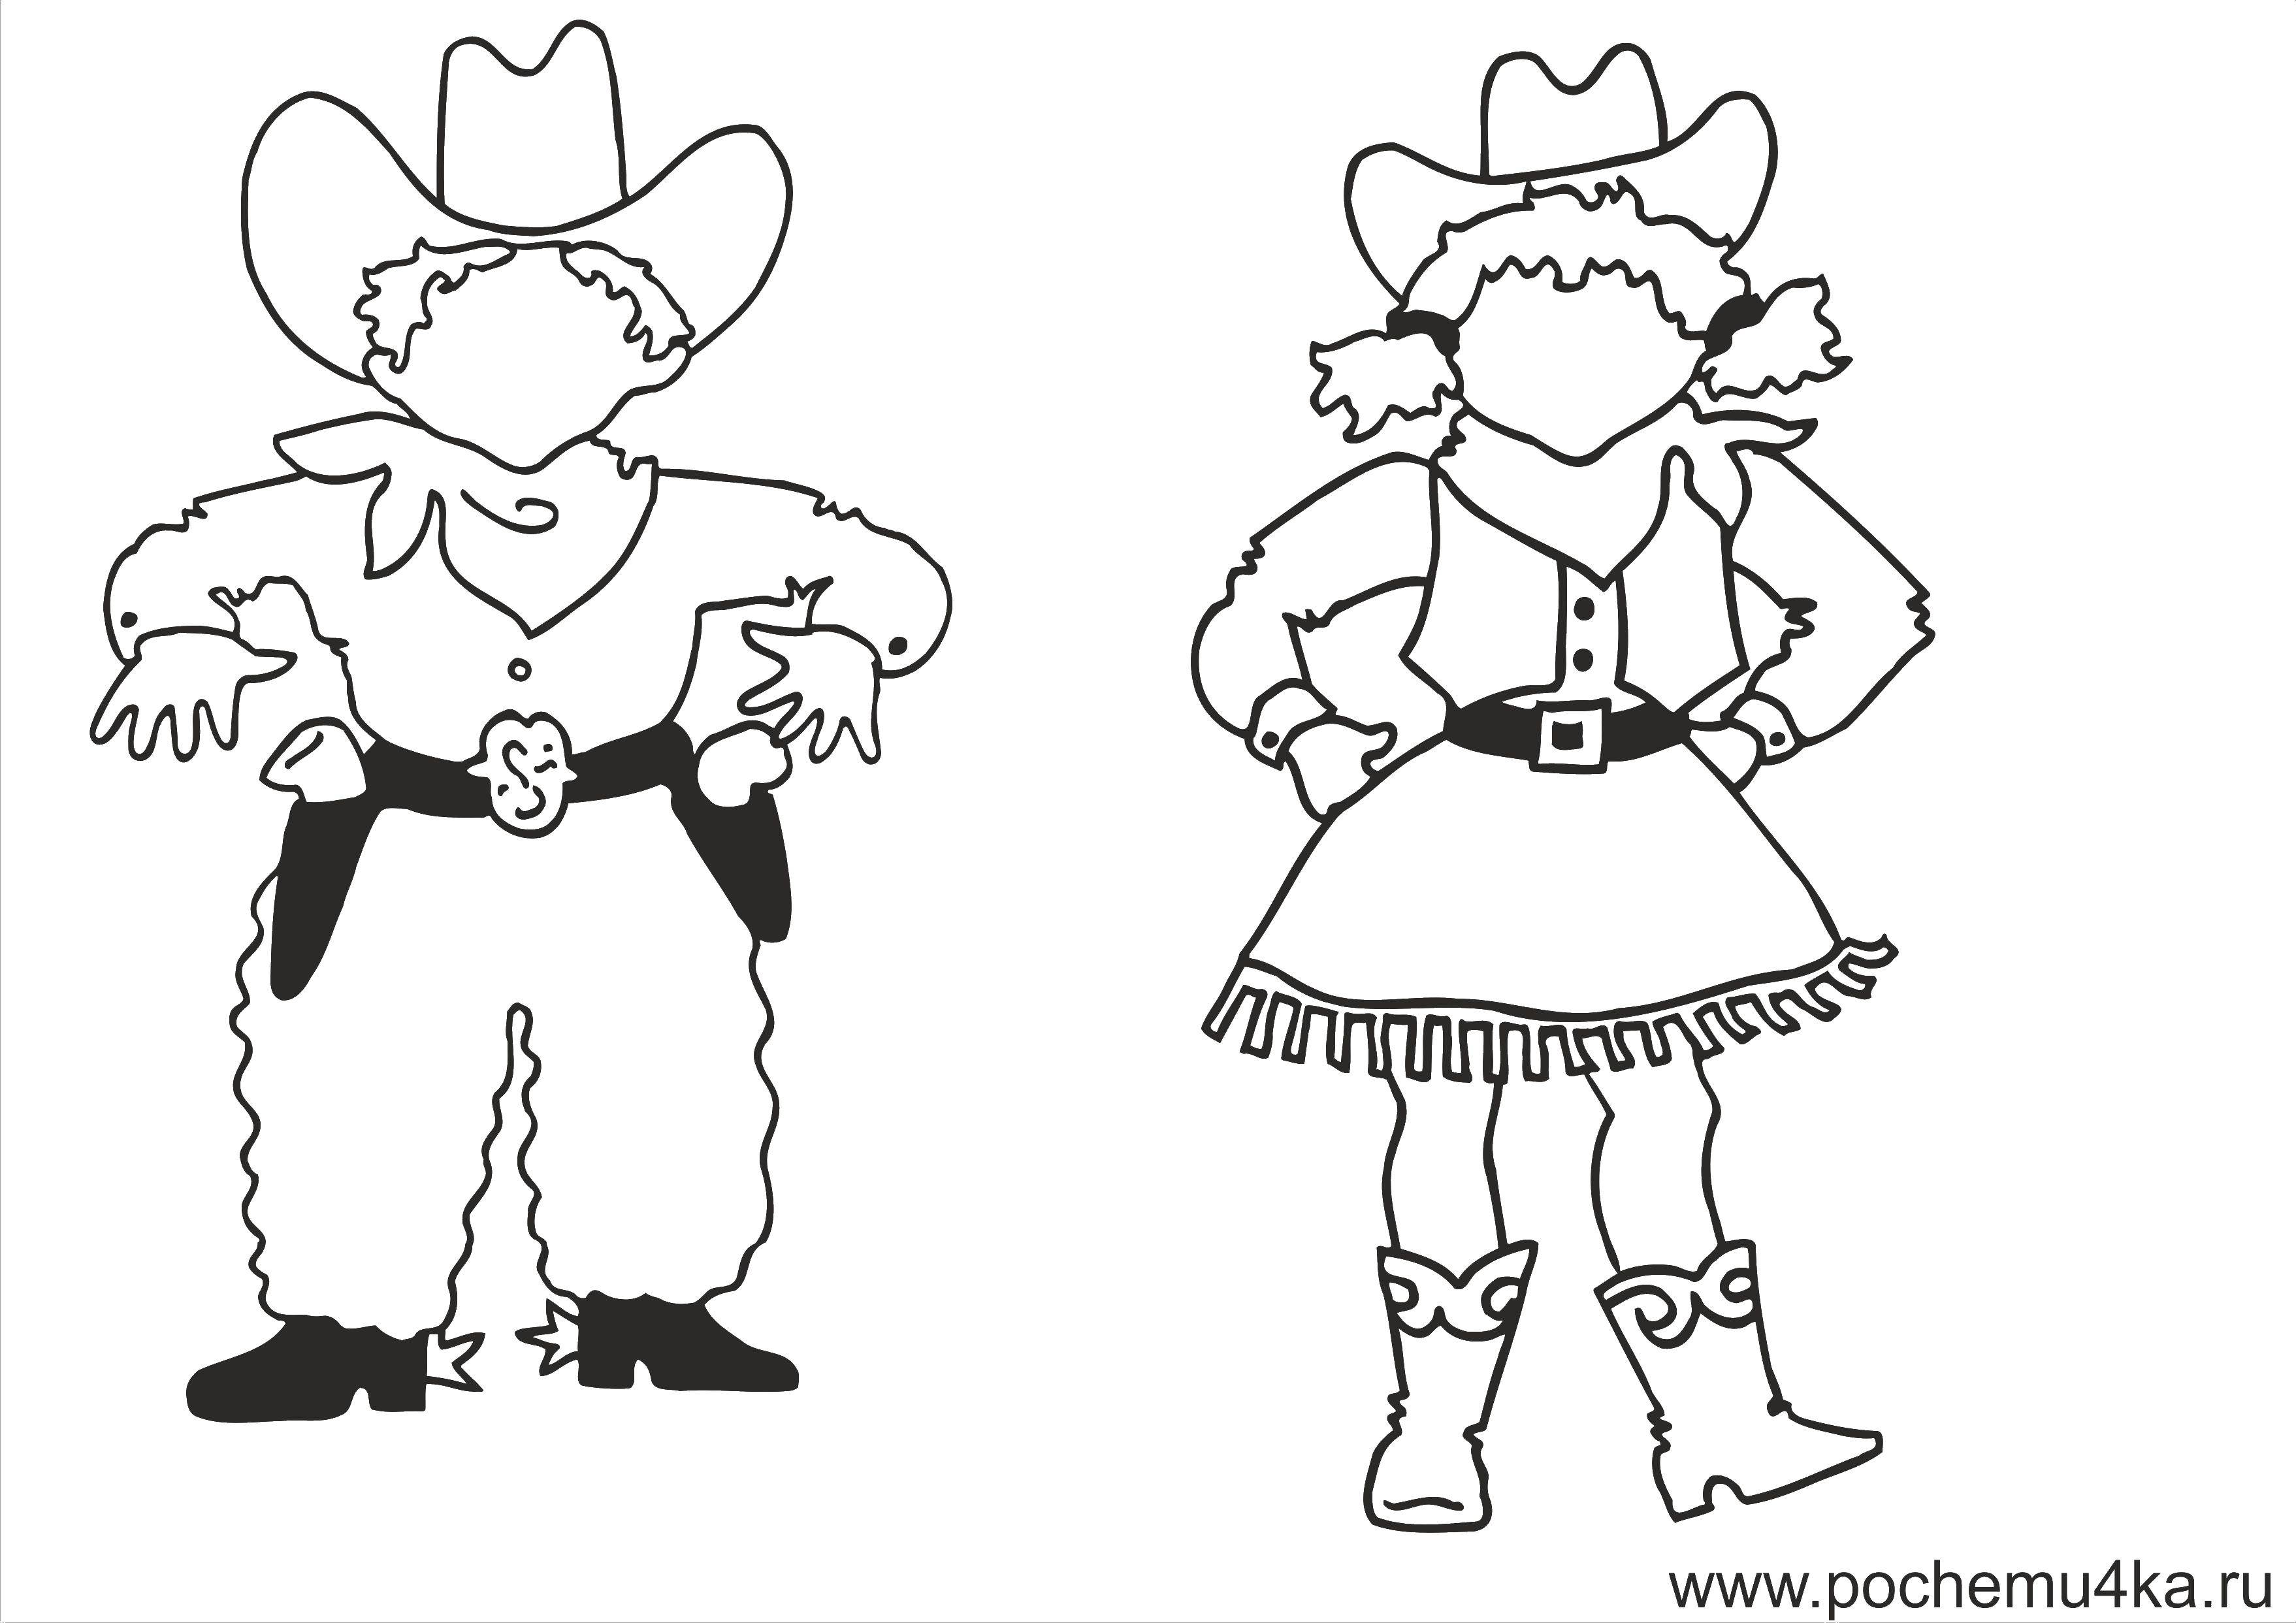 Coloring Cowboy boy and girl. Category children. Tags:  children, cowboy, boy, girl.